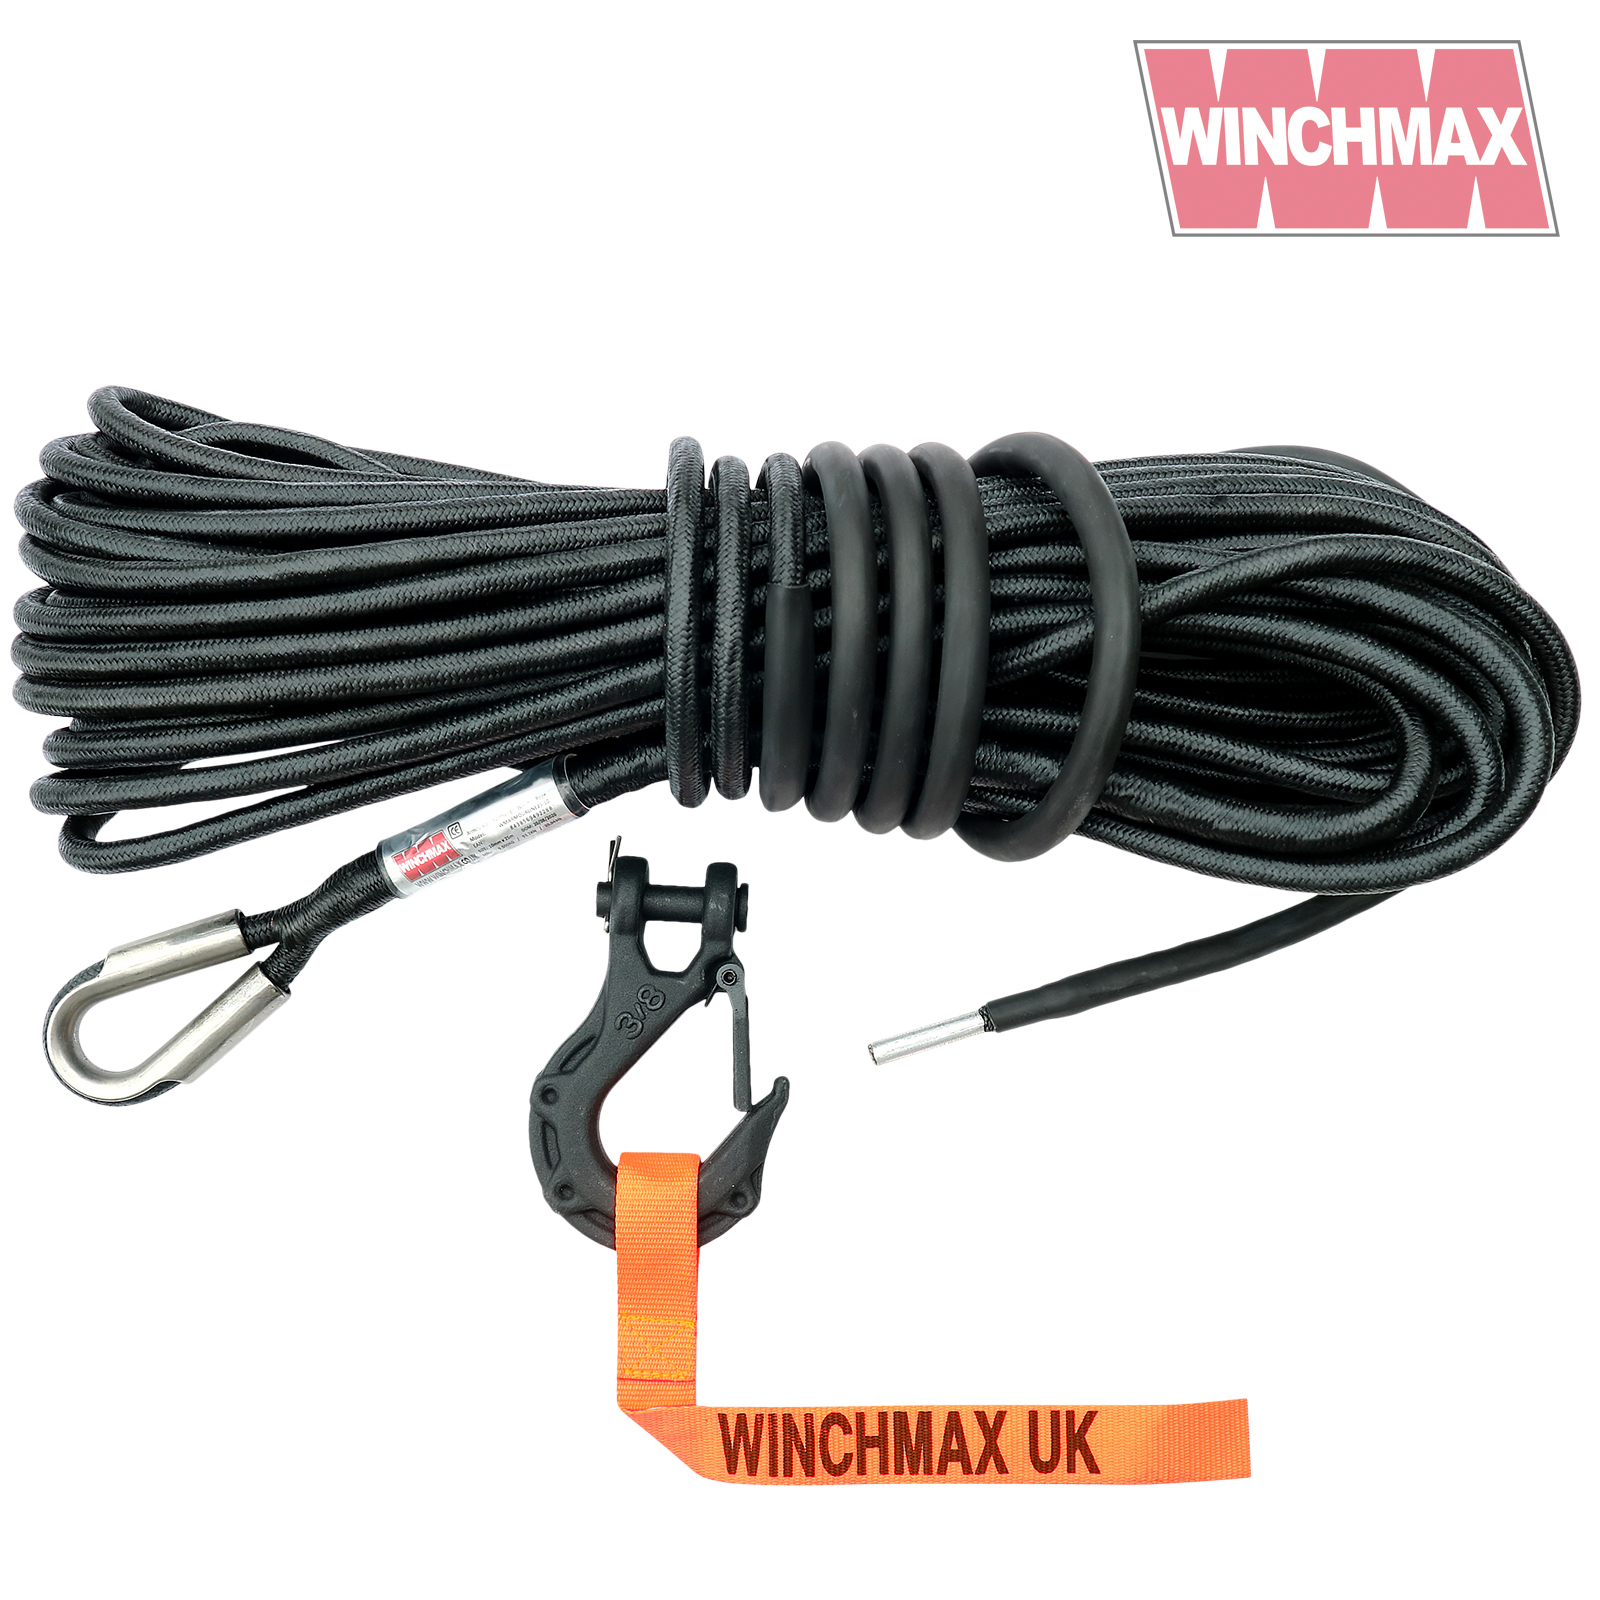 Winchmax Armourline Rope 25m x 10mm with hole fixing and Tactical Hook